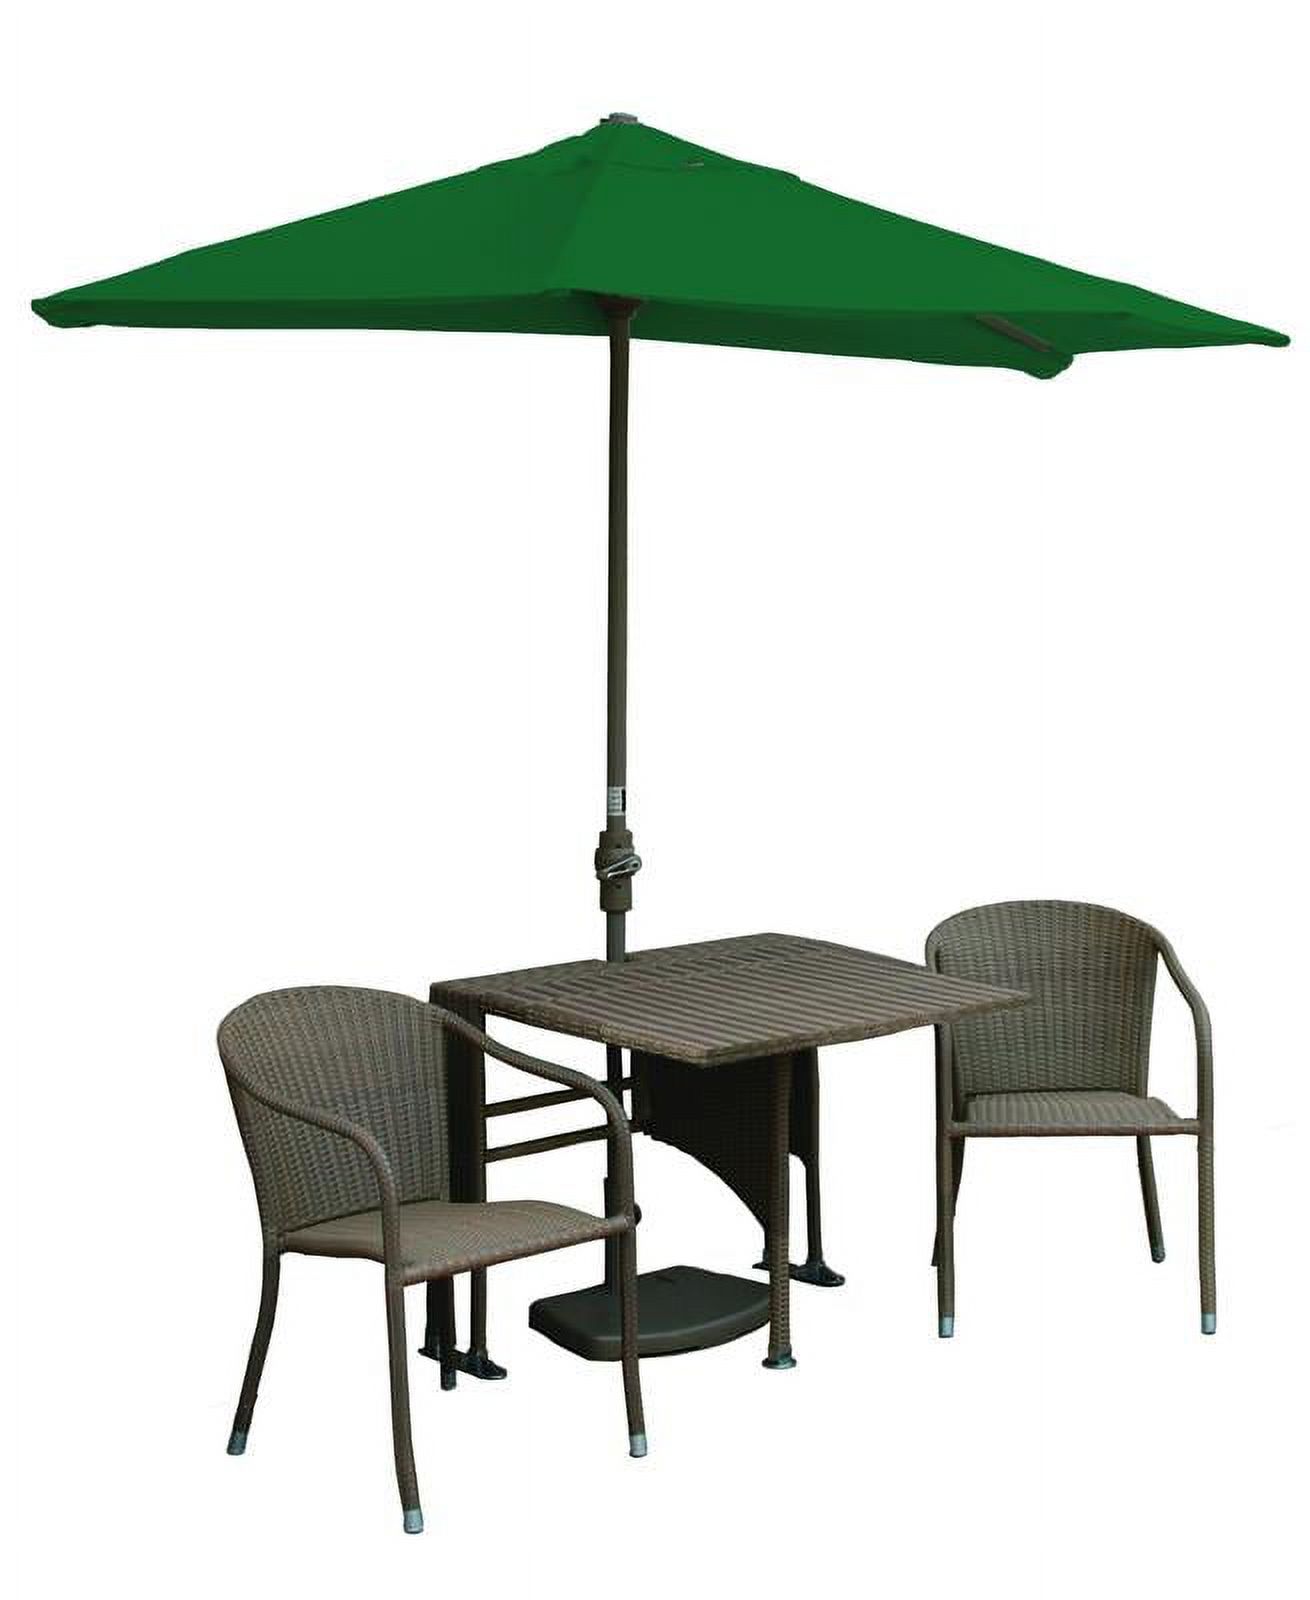 Blue Star Group Terrace Mates Daniella All-Weather Wicker Coffee Color Table Set w/ 9'-Wide OFF-THE-WALL BRELLA - Green Olefin Canopy - image 1 of 9